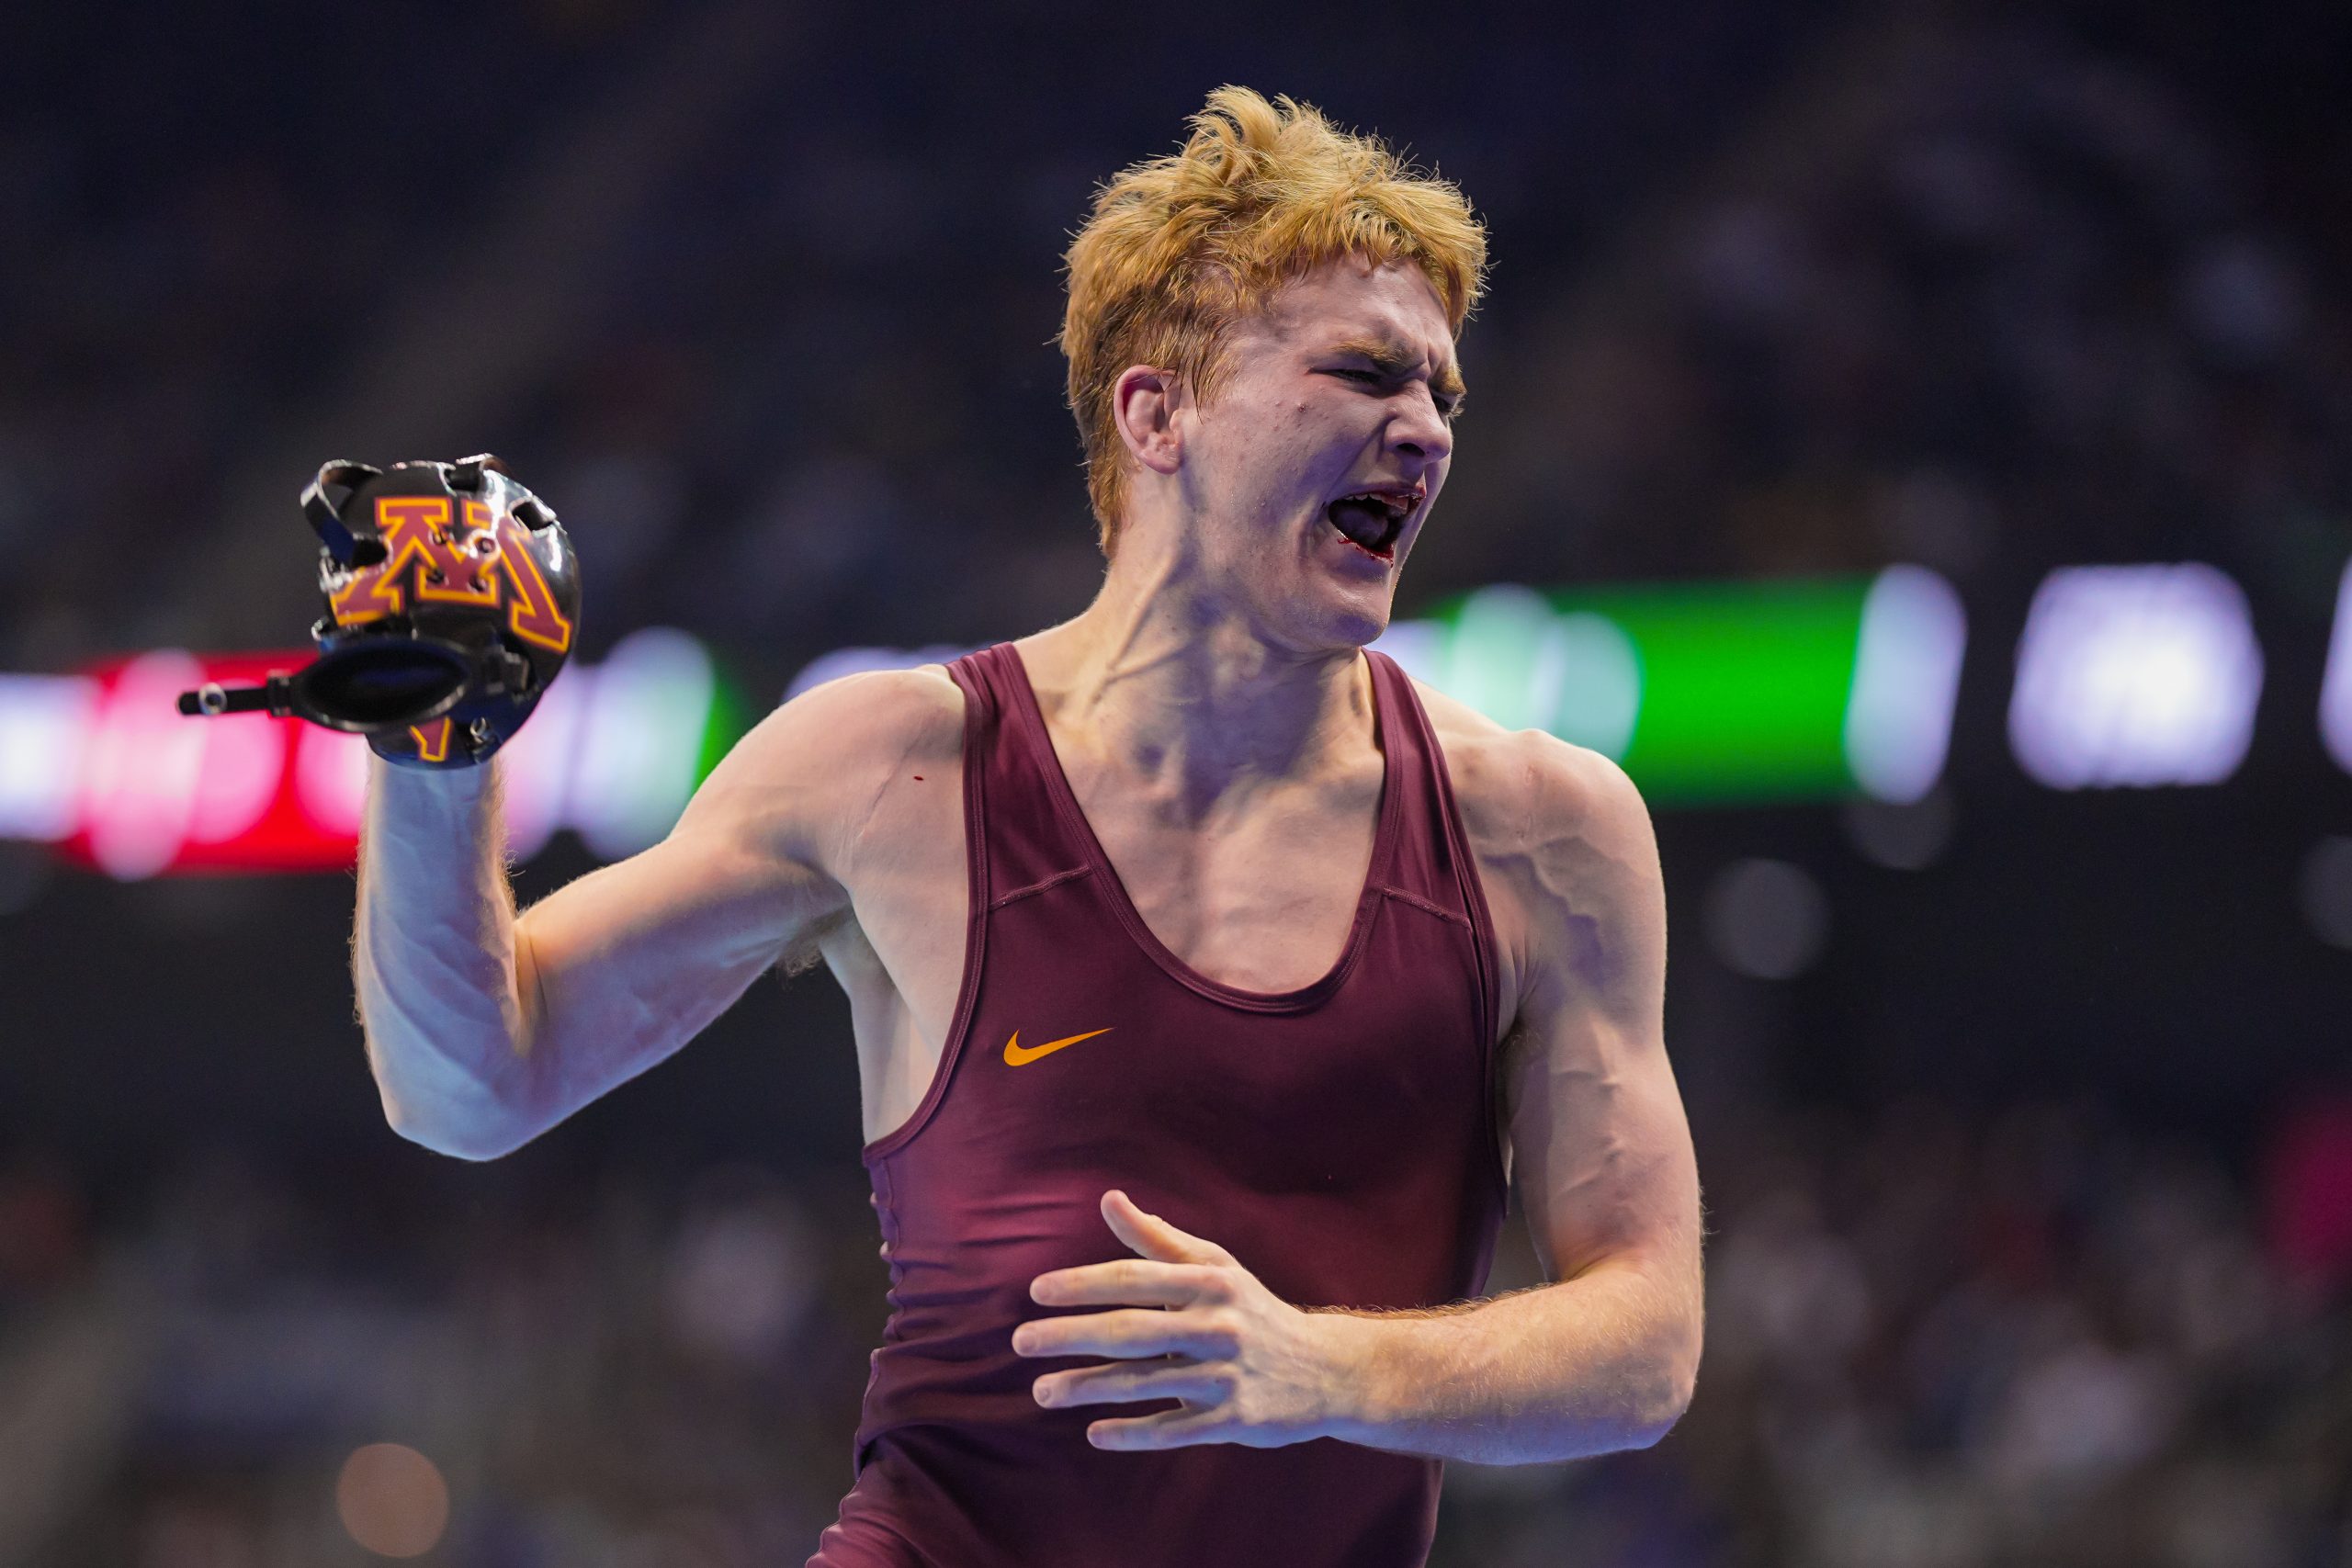 Vance VomBaur walked away with his first NCAA All-American title.